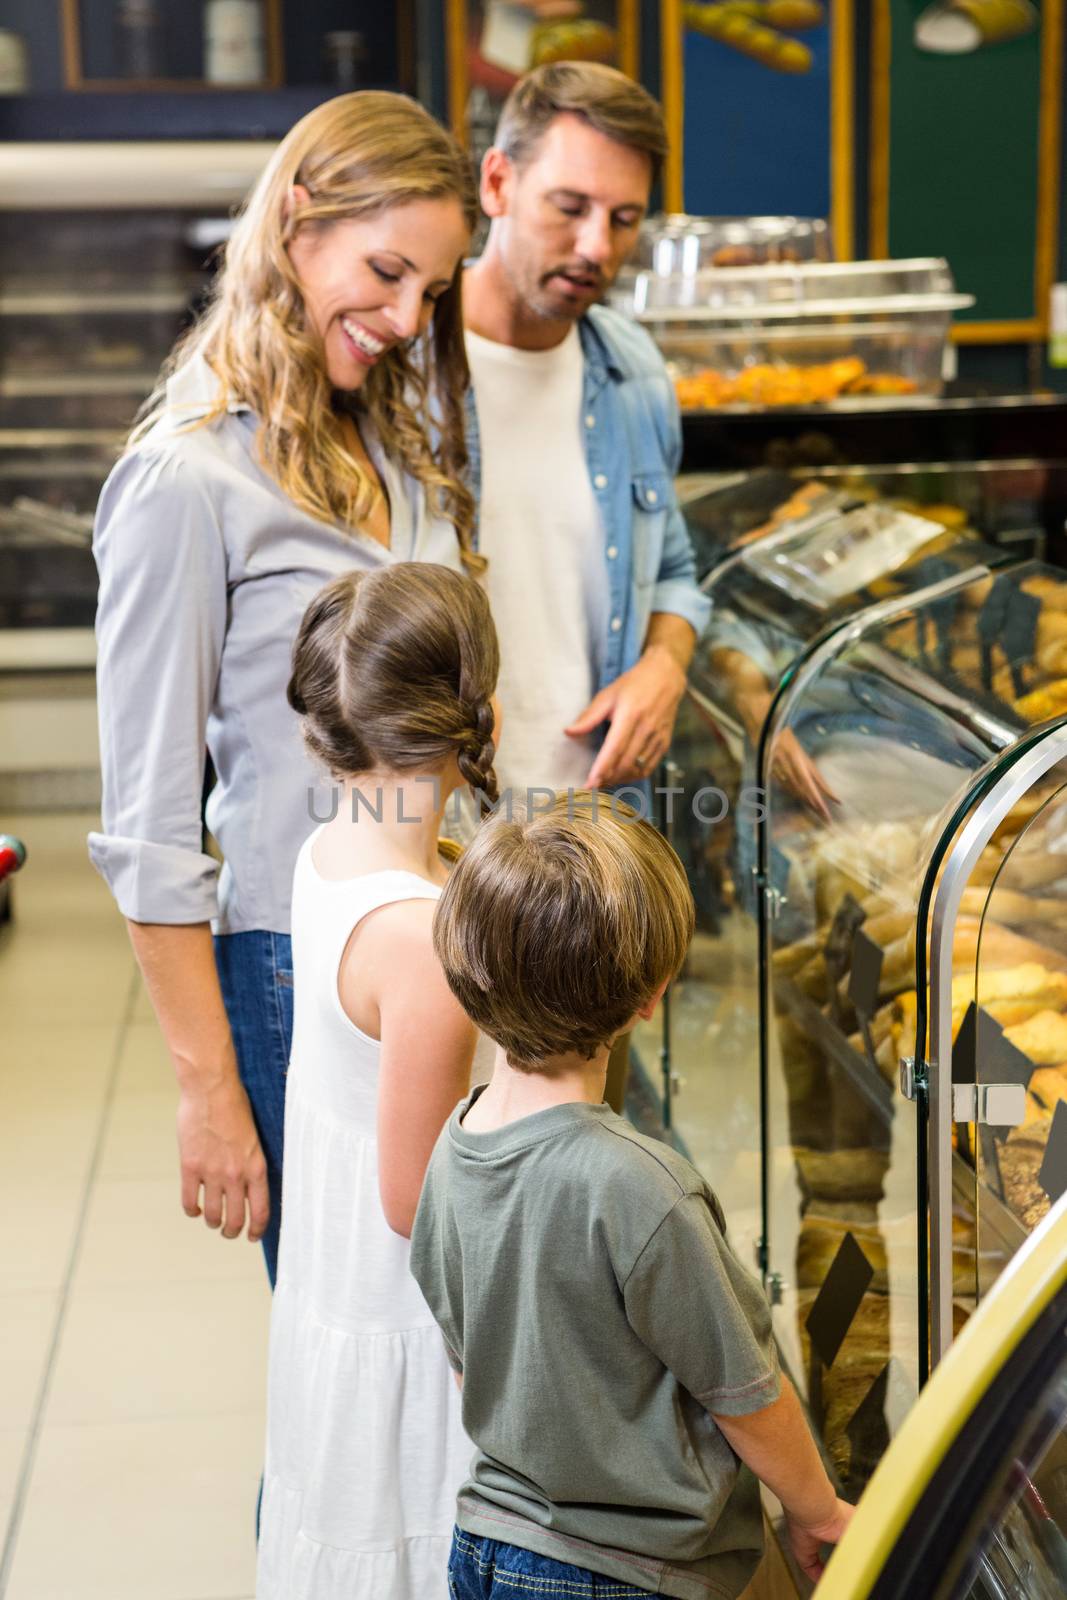 Happy family looking at bread in grocery store 